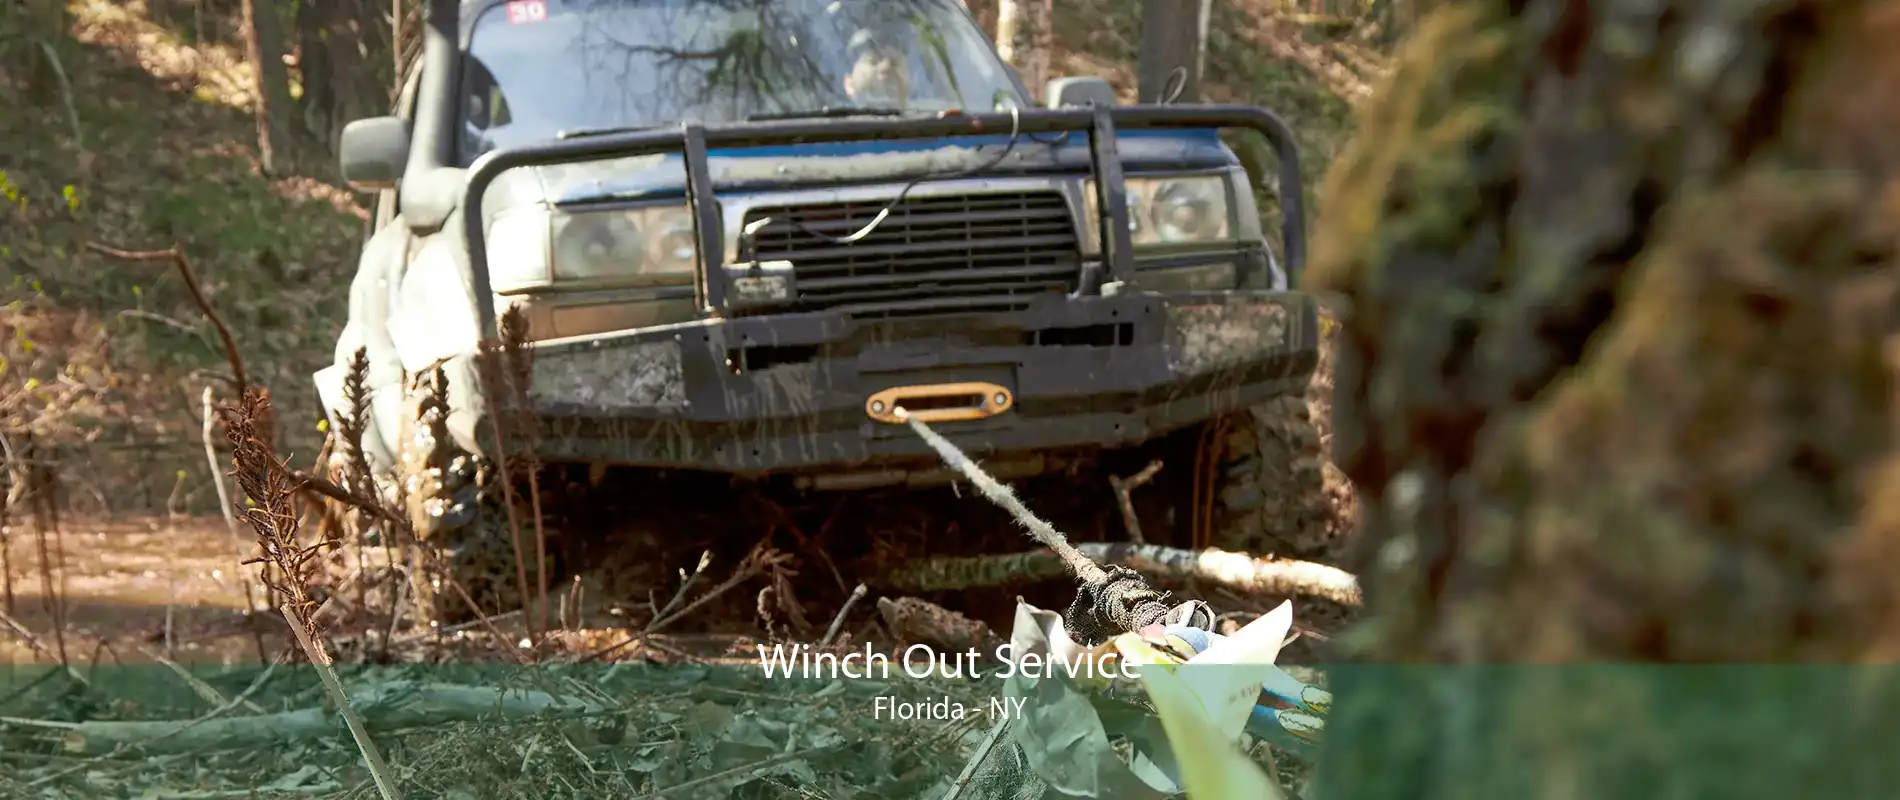 Winch Out Service Florida - NY